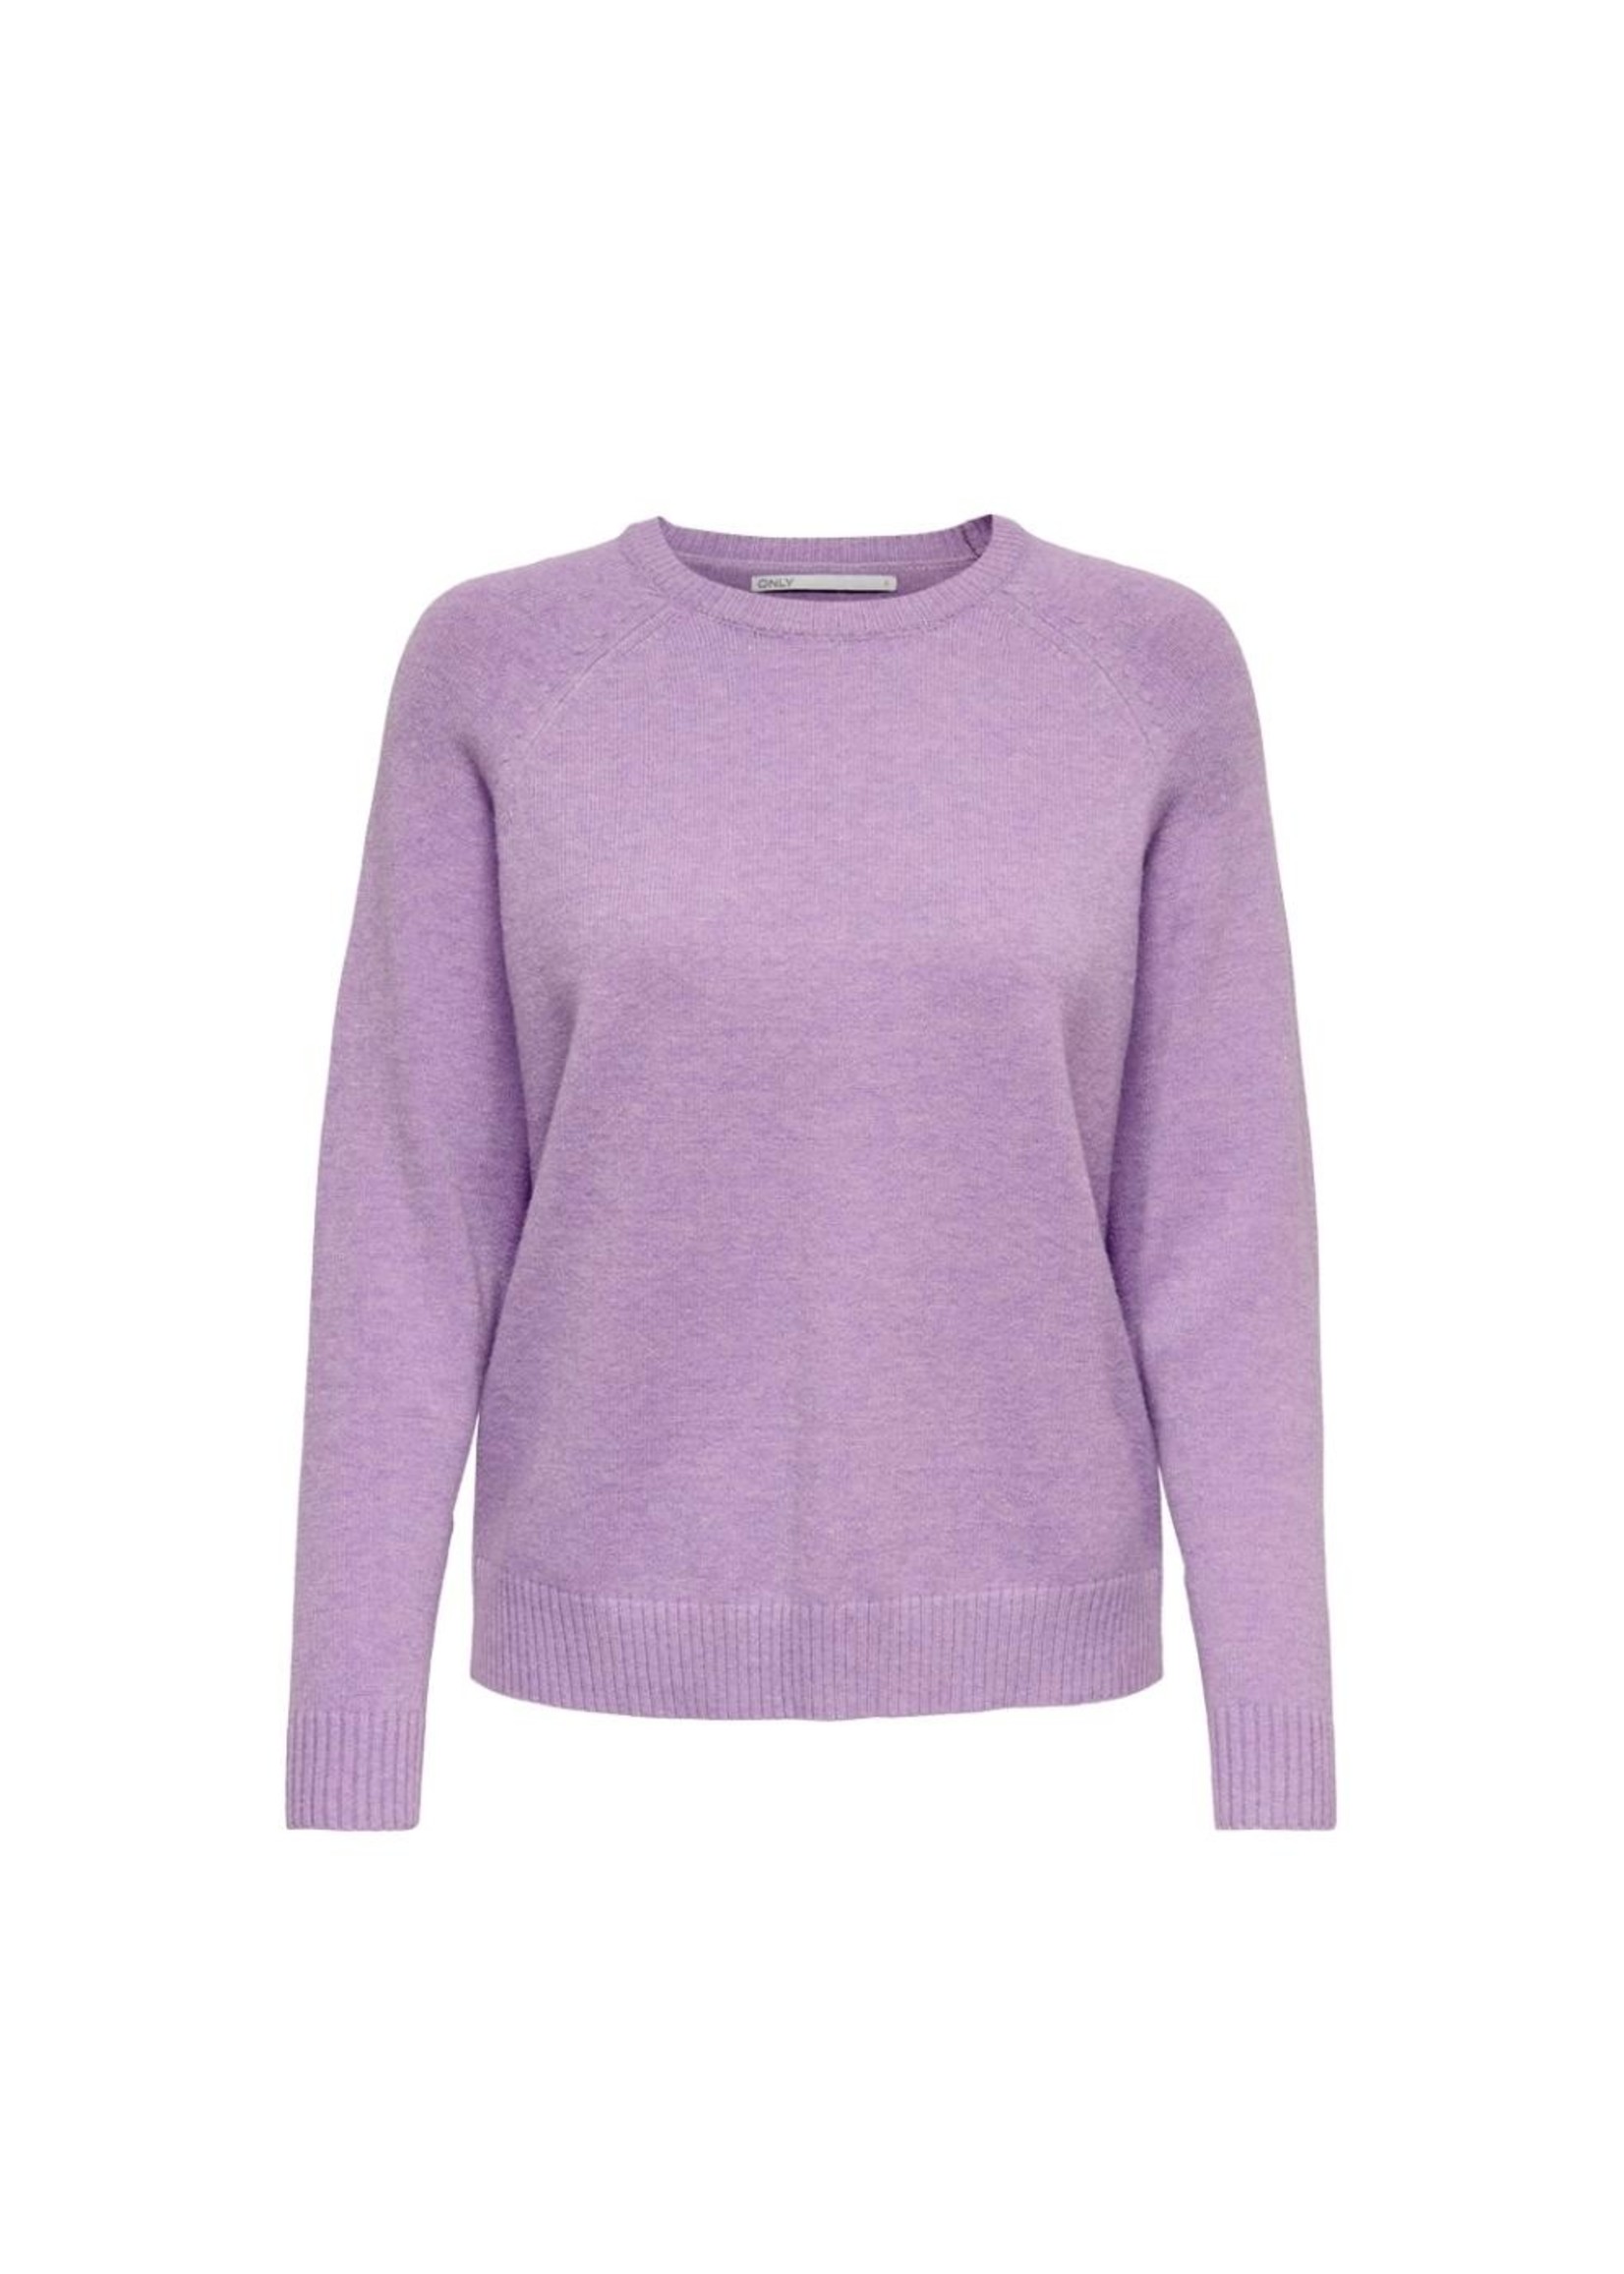 Only Dewberry Knit Sweater